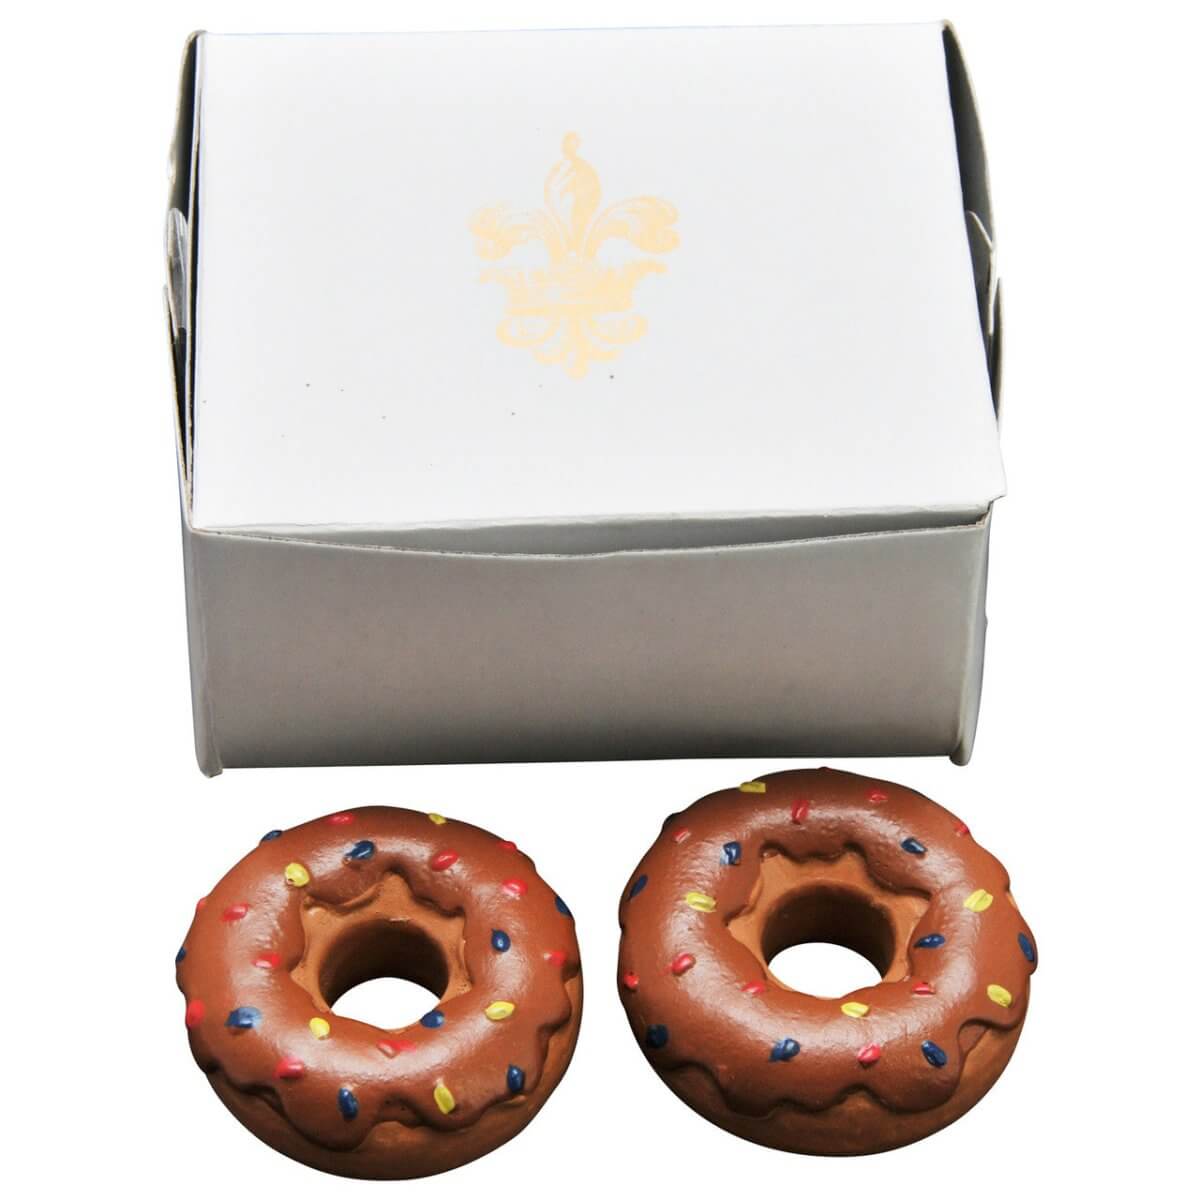 2 Chocolate Frosted Doughnuts with Bakery Box, Accessories for 18 Inch Dolls - Simon's Collectibles